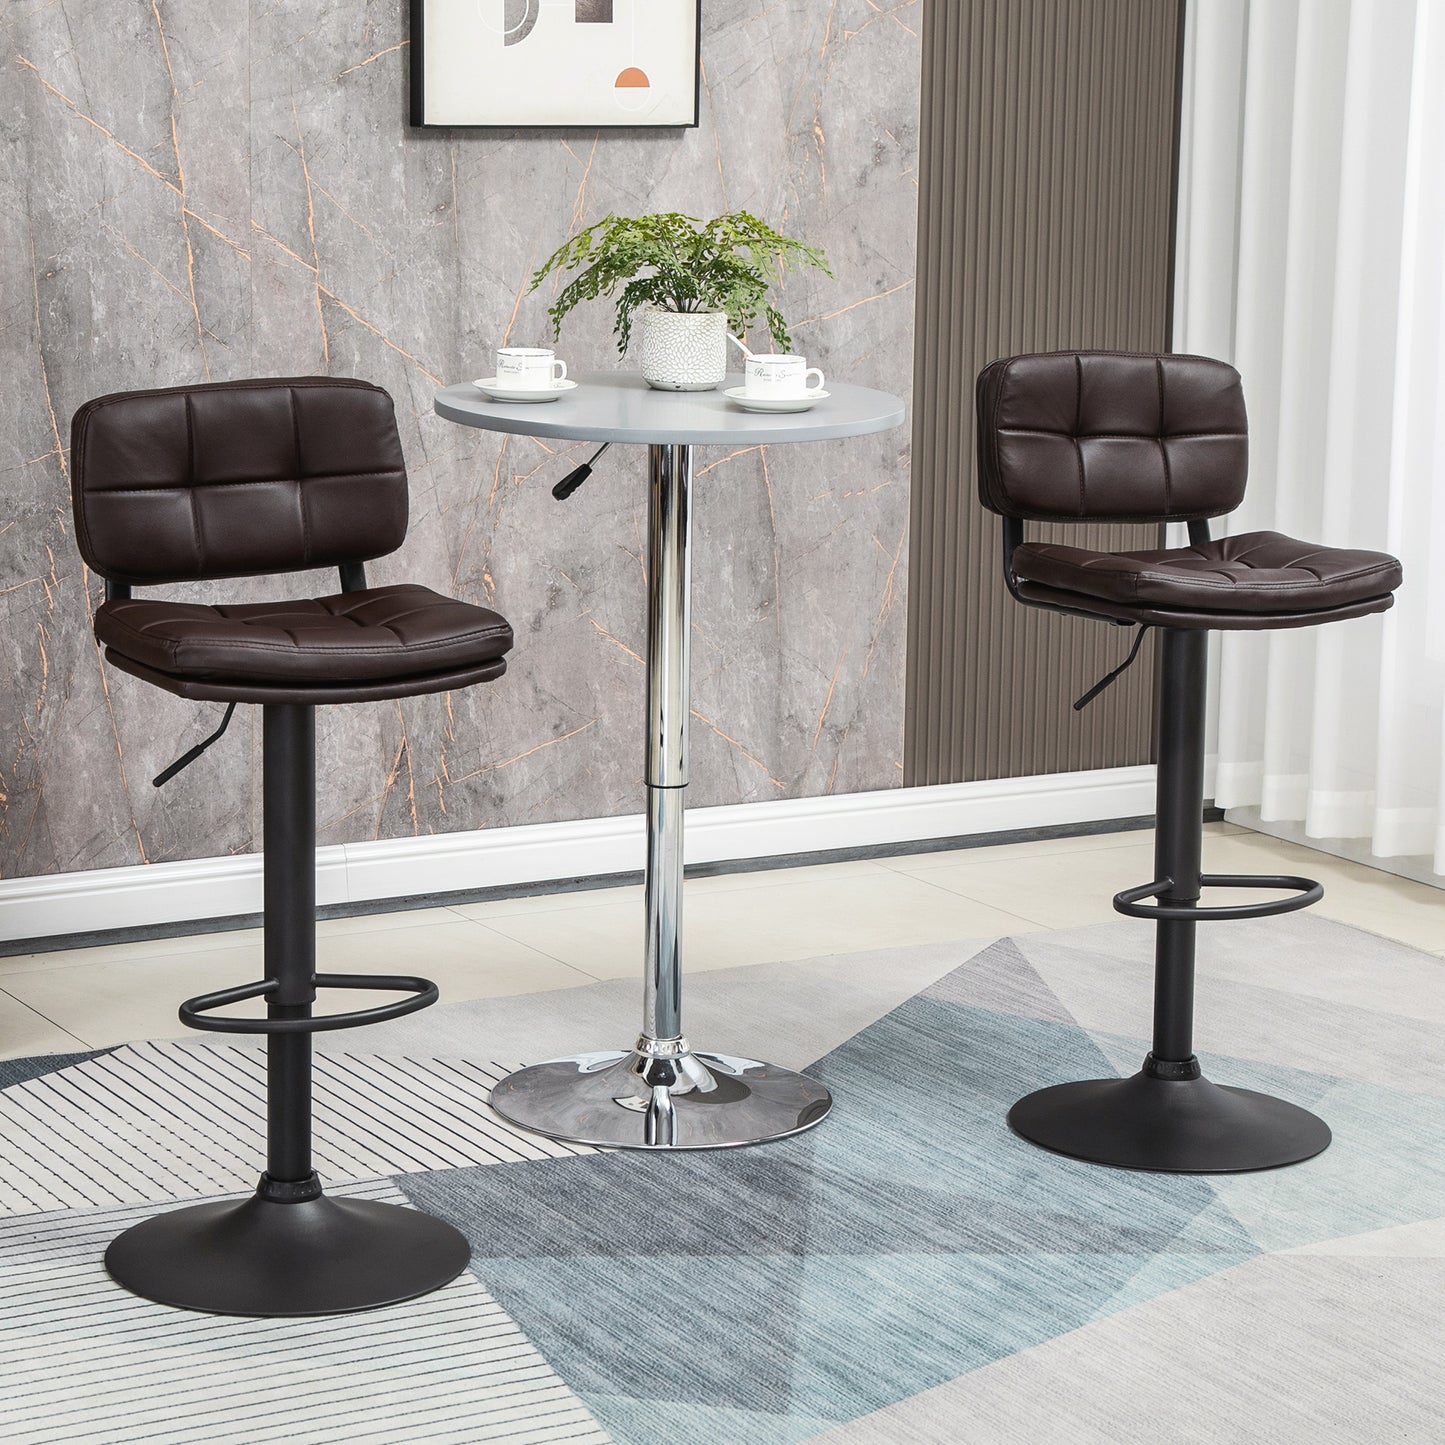 HOMCOM Swivel Bar Stools Set of 2 Dining Chairs Barstools Adjustable Height with Footrest for Kitchen Counter Home Bar Brown